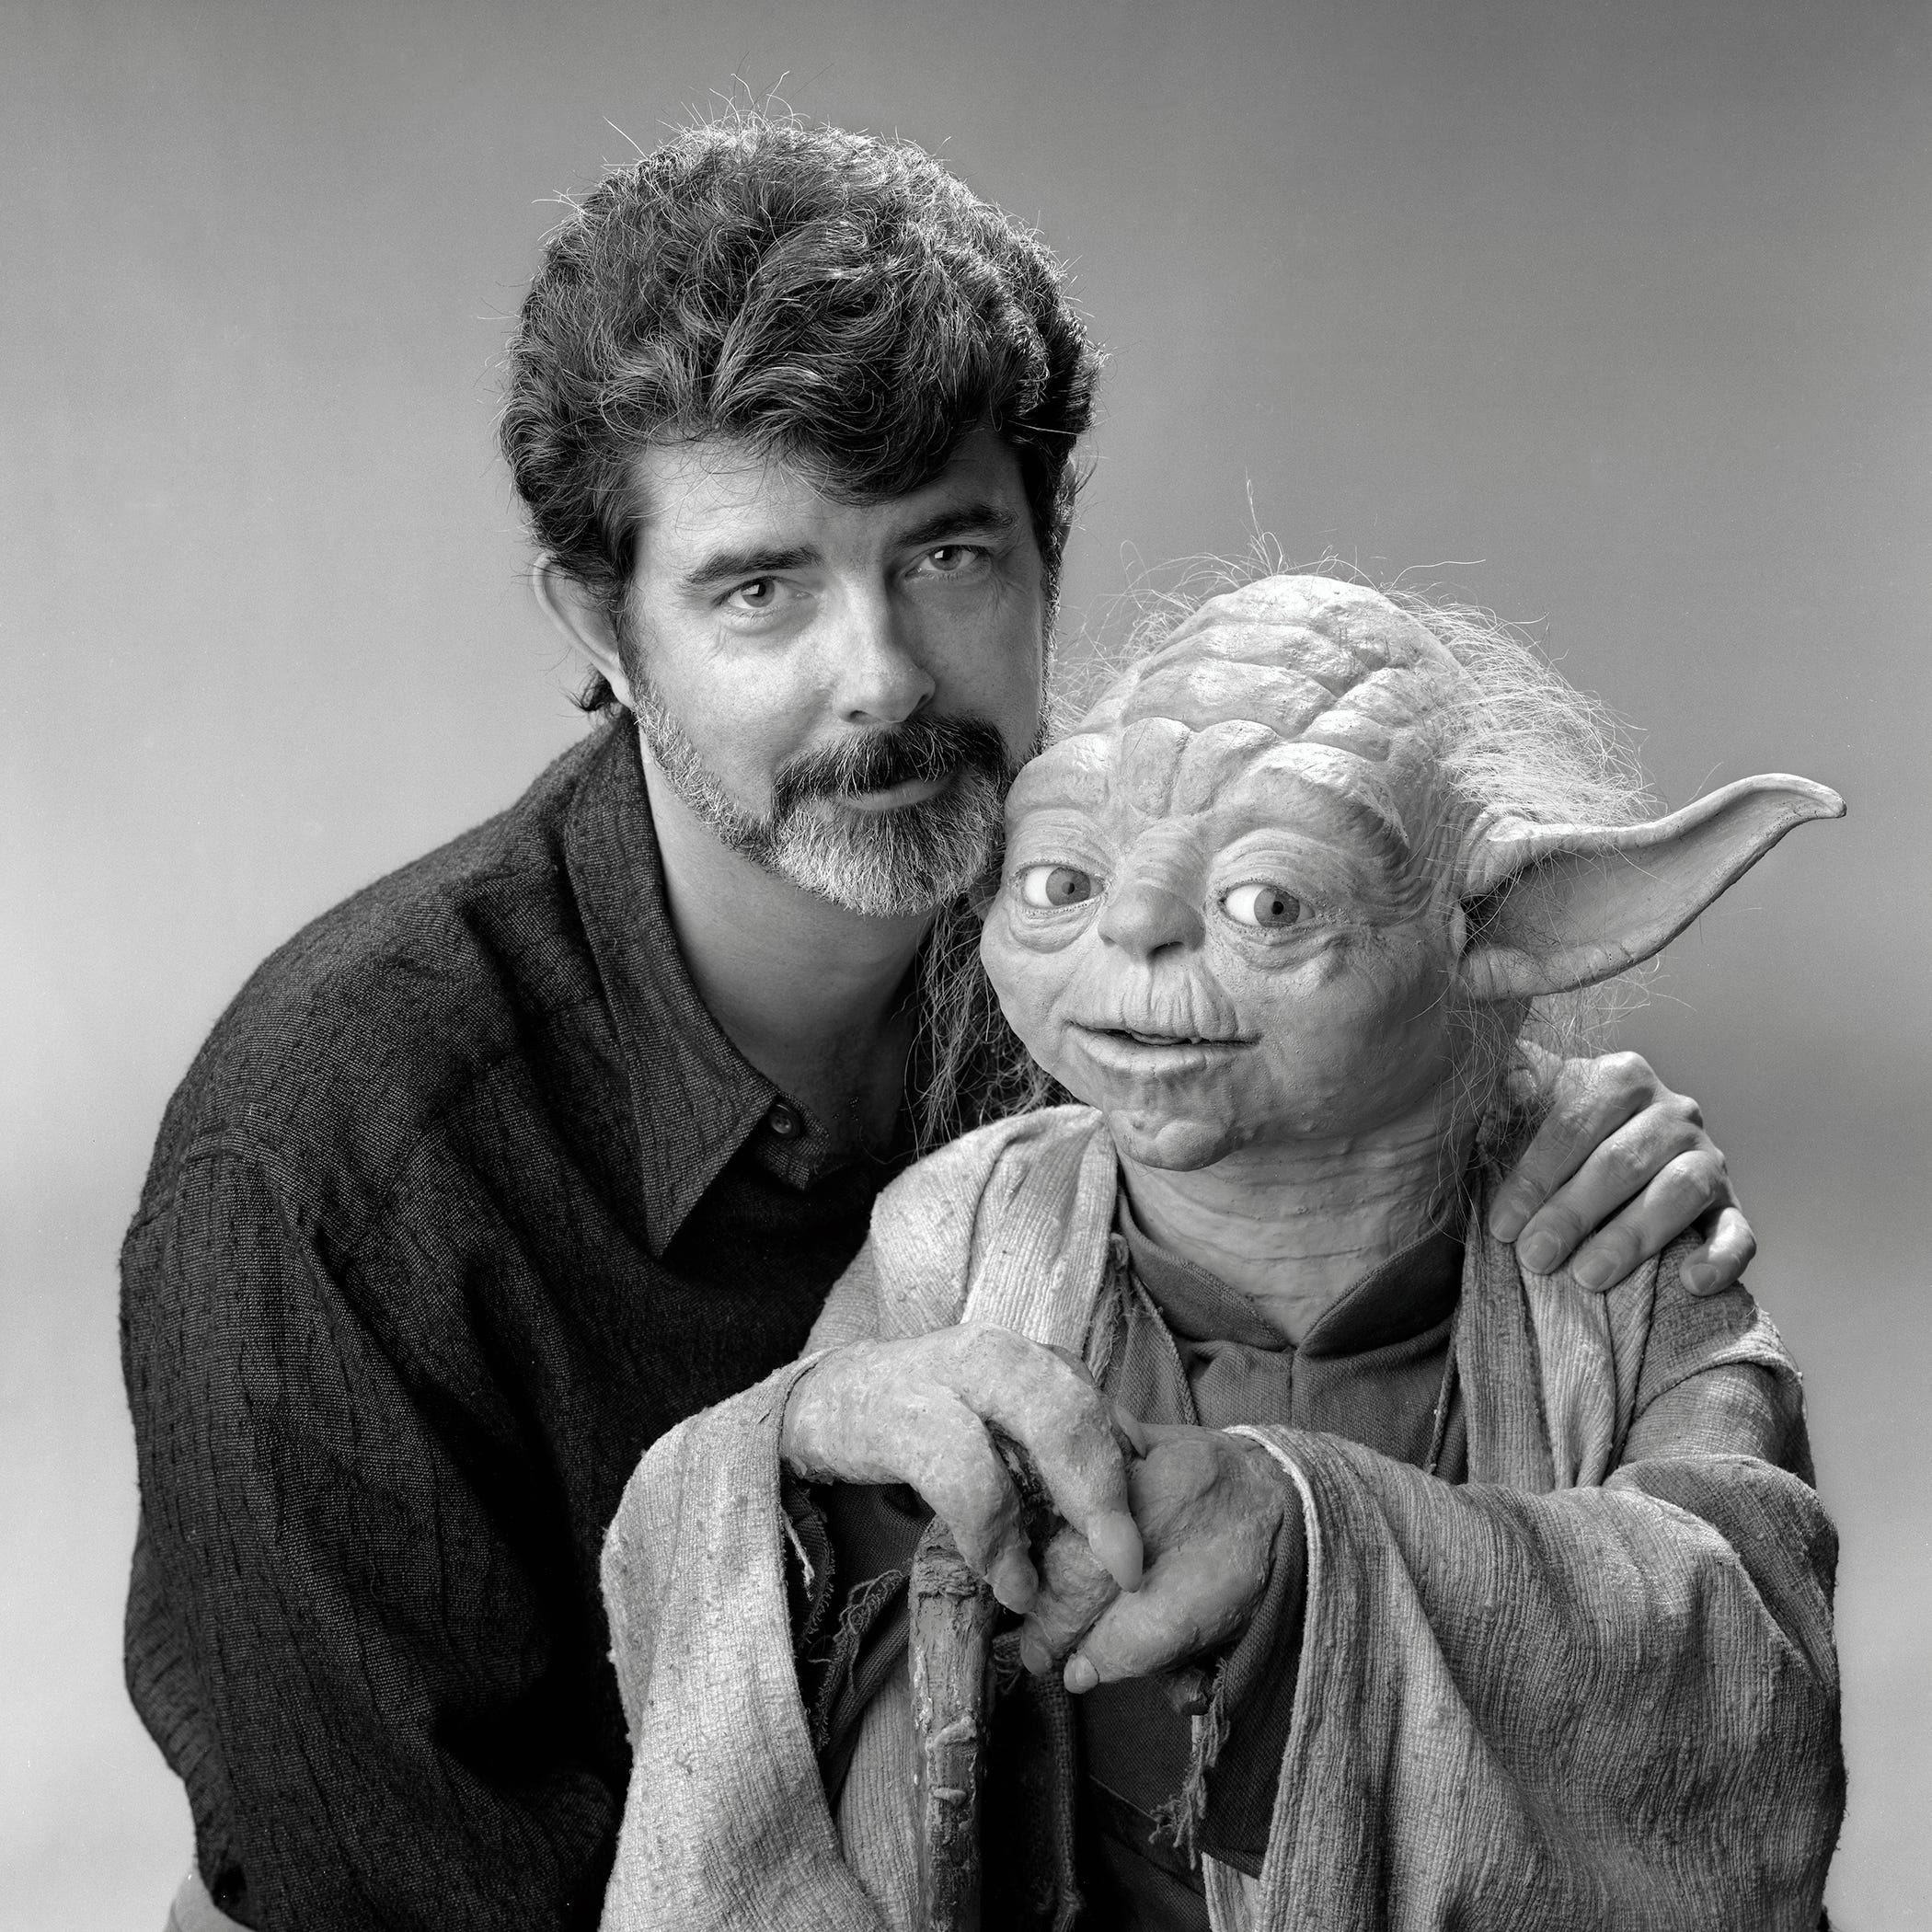 George Lucas pictured with Yoda